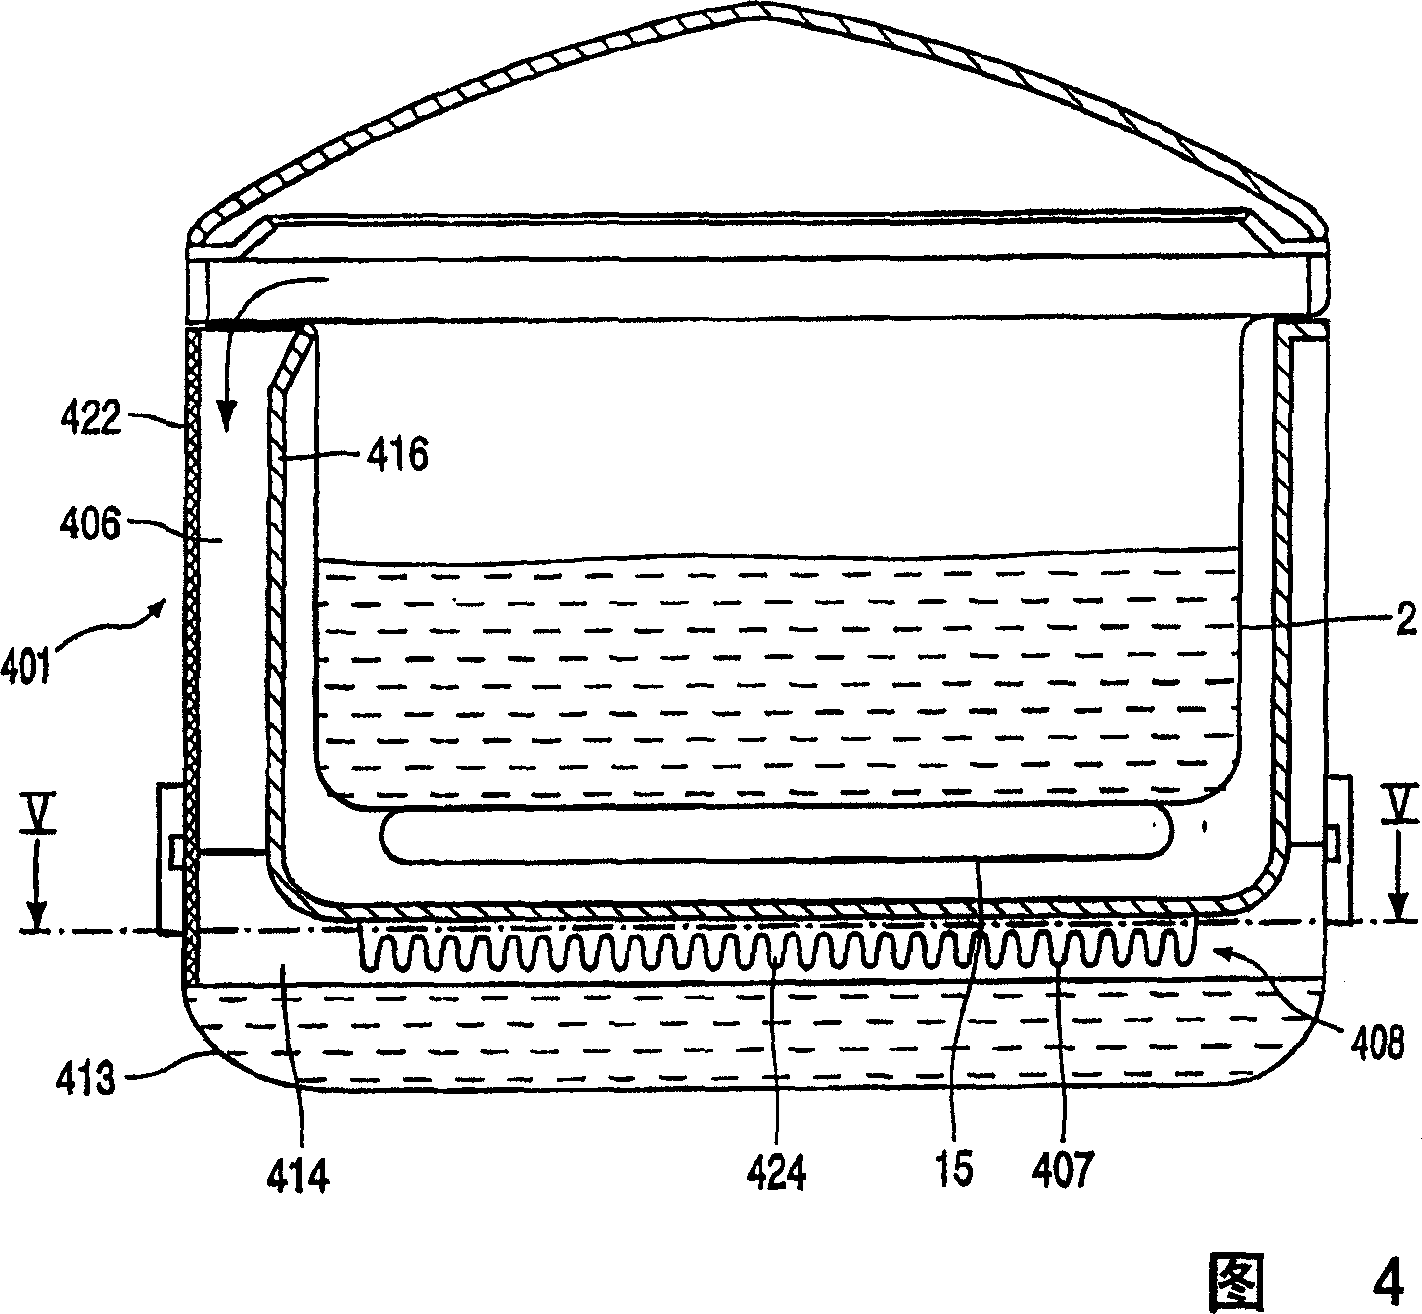 Apparatus for deep-frying food comprising reservoir for collecting condensate from vapour being discharged during deep-frying process